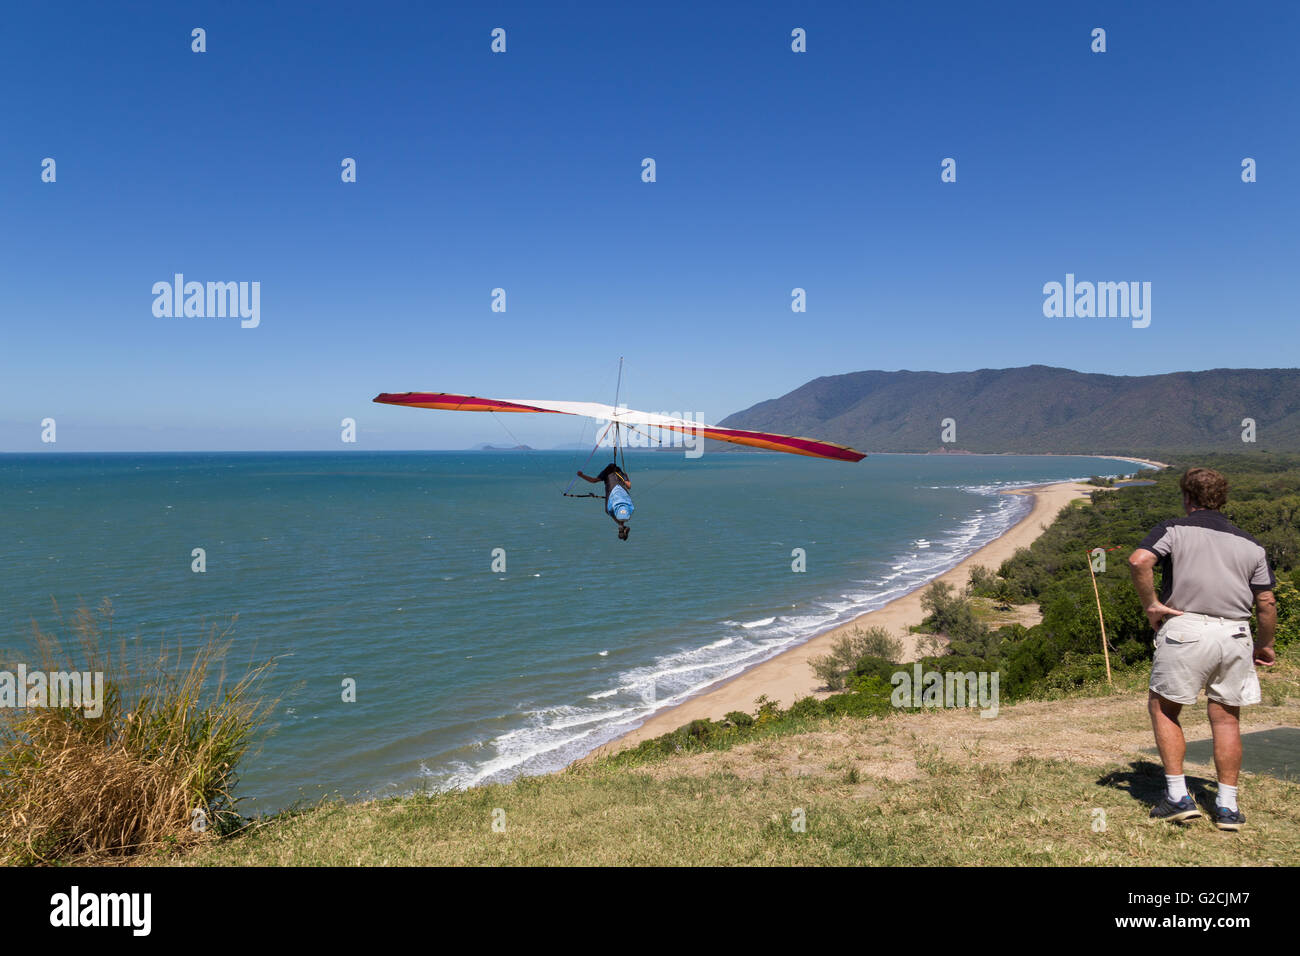 Port Douglas, Australia - April 27, 2015: Hang glider starting from from Trinity Bay lookout. Stock Photo